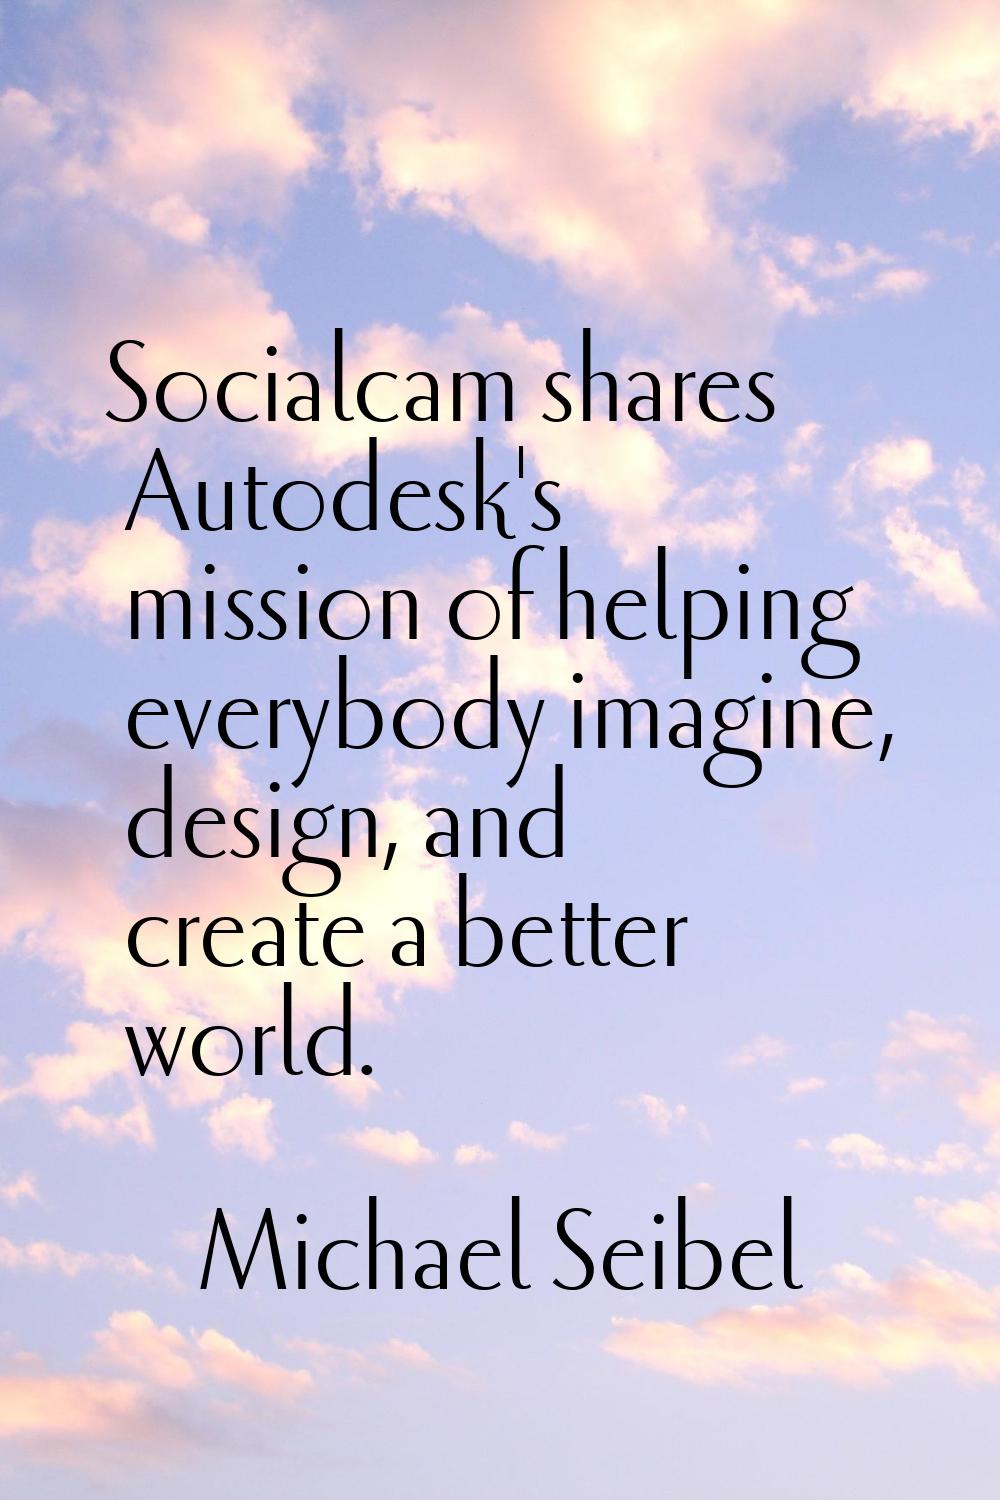 Socialcam shares Autodesk's mission of helping everybody imagine, design, and create a better world